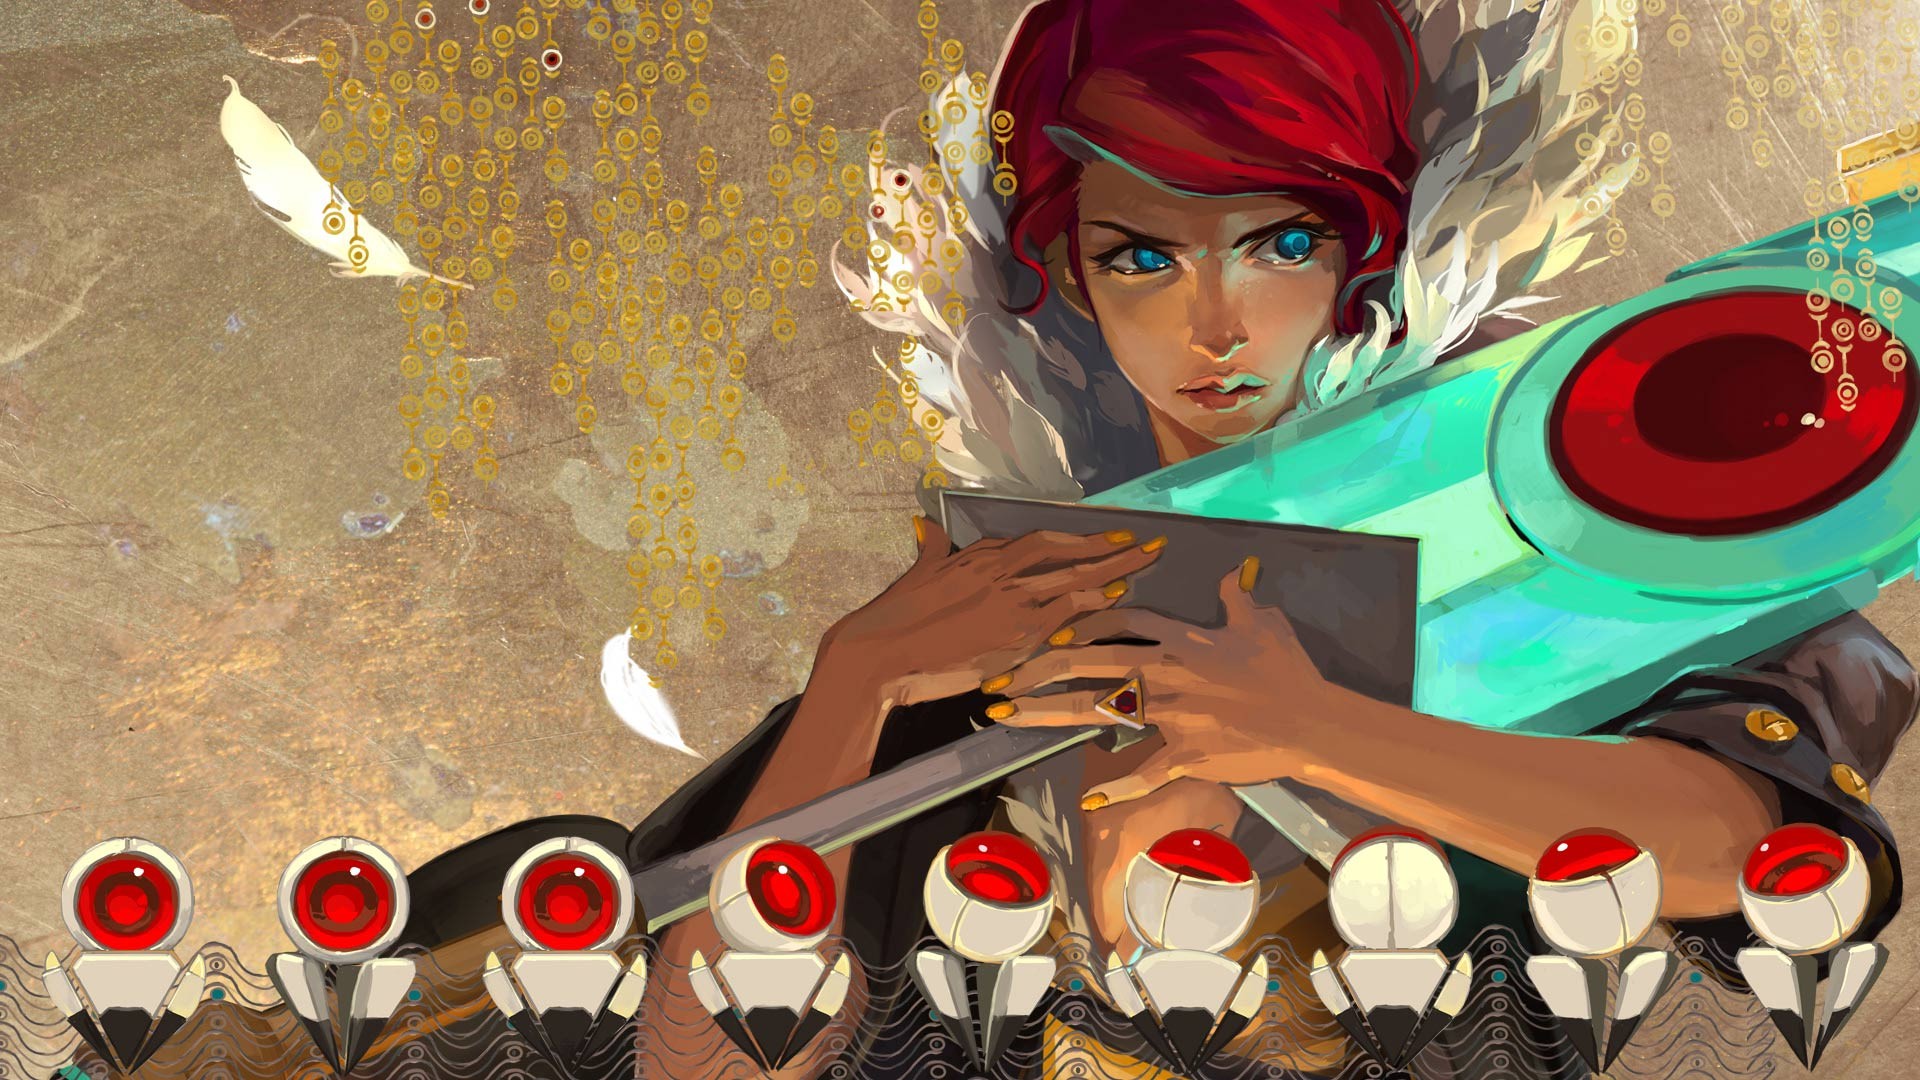 General 1920x1080 Transistor Red (Transistor) blue eyes redhead artwork video games PC gaming video game art video game girls aqua eyes women yellow nails painted nails feathers